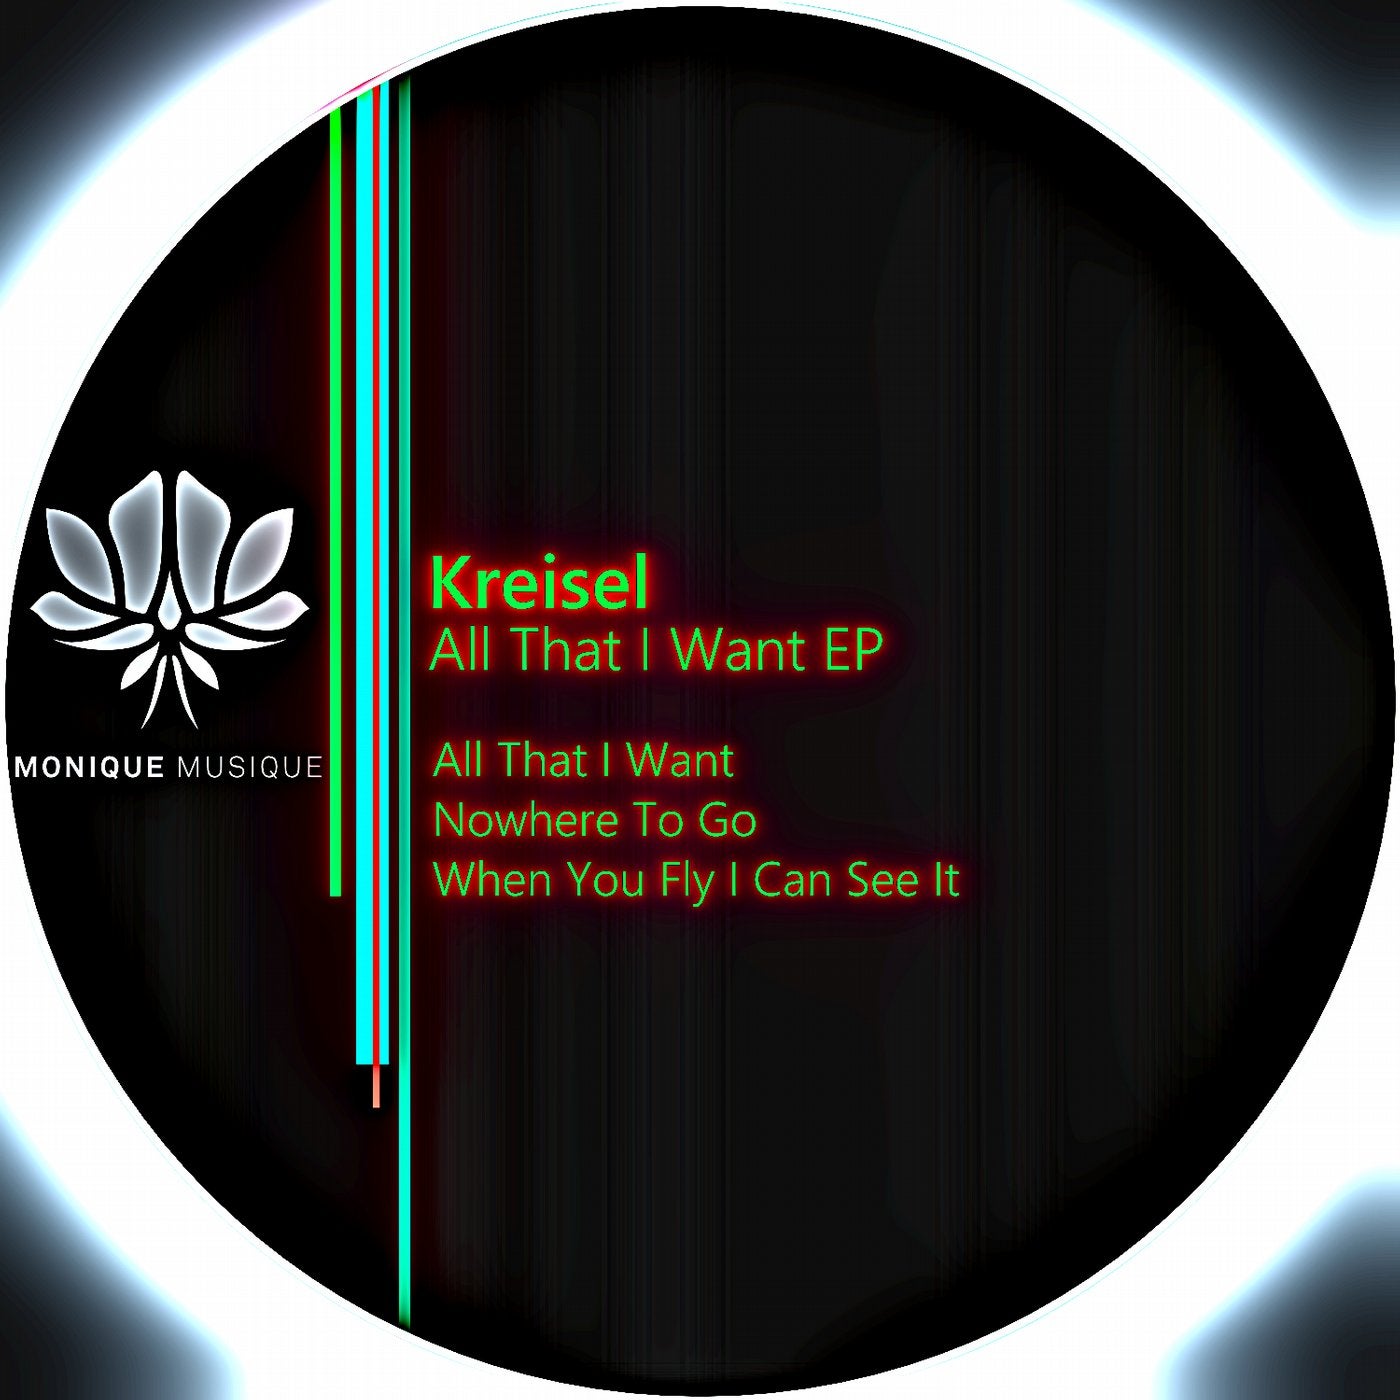 All That I Want EP